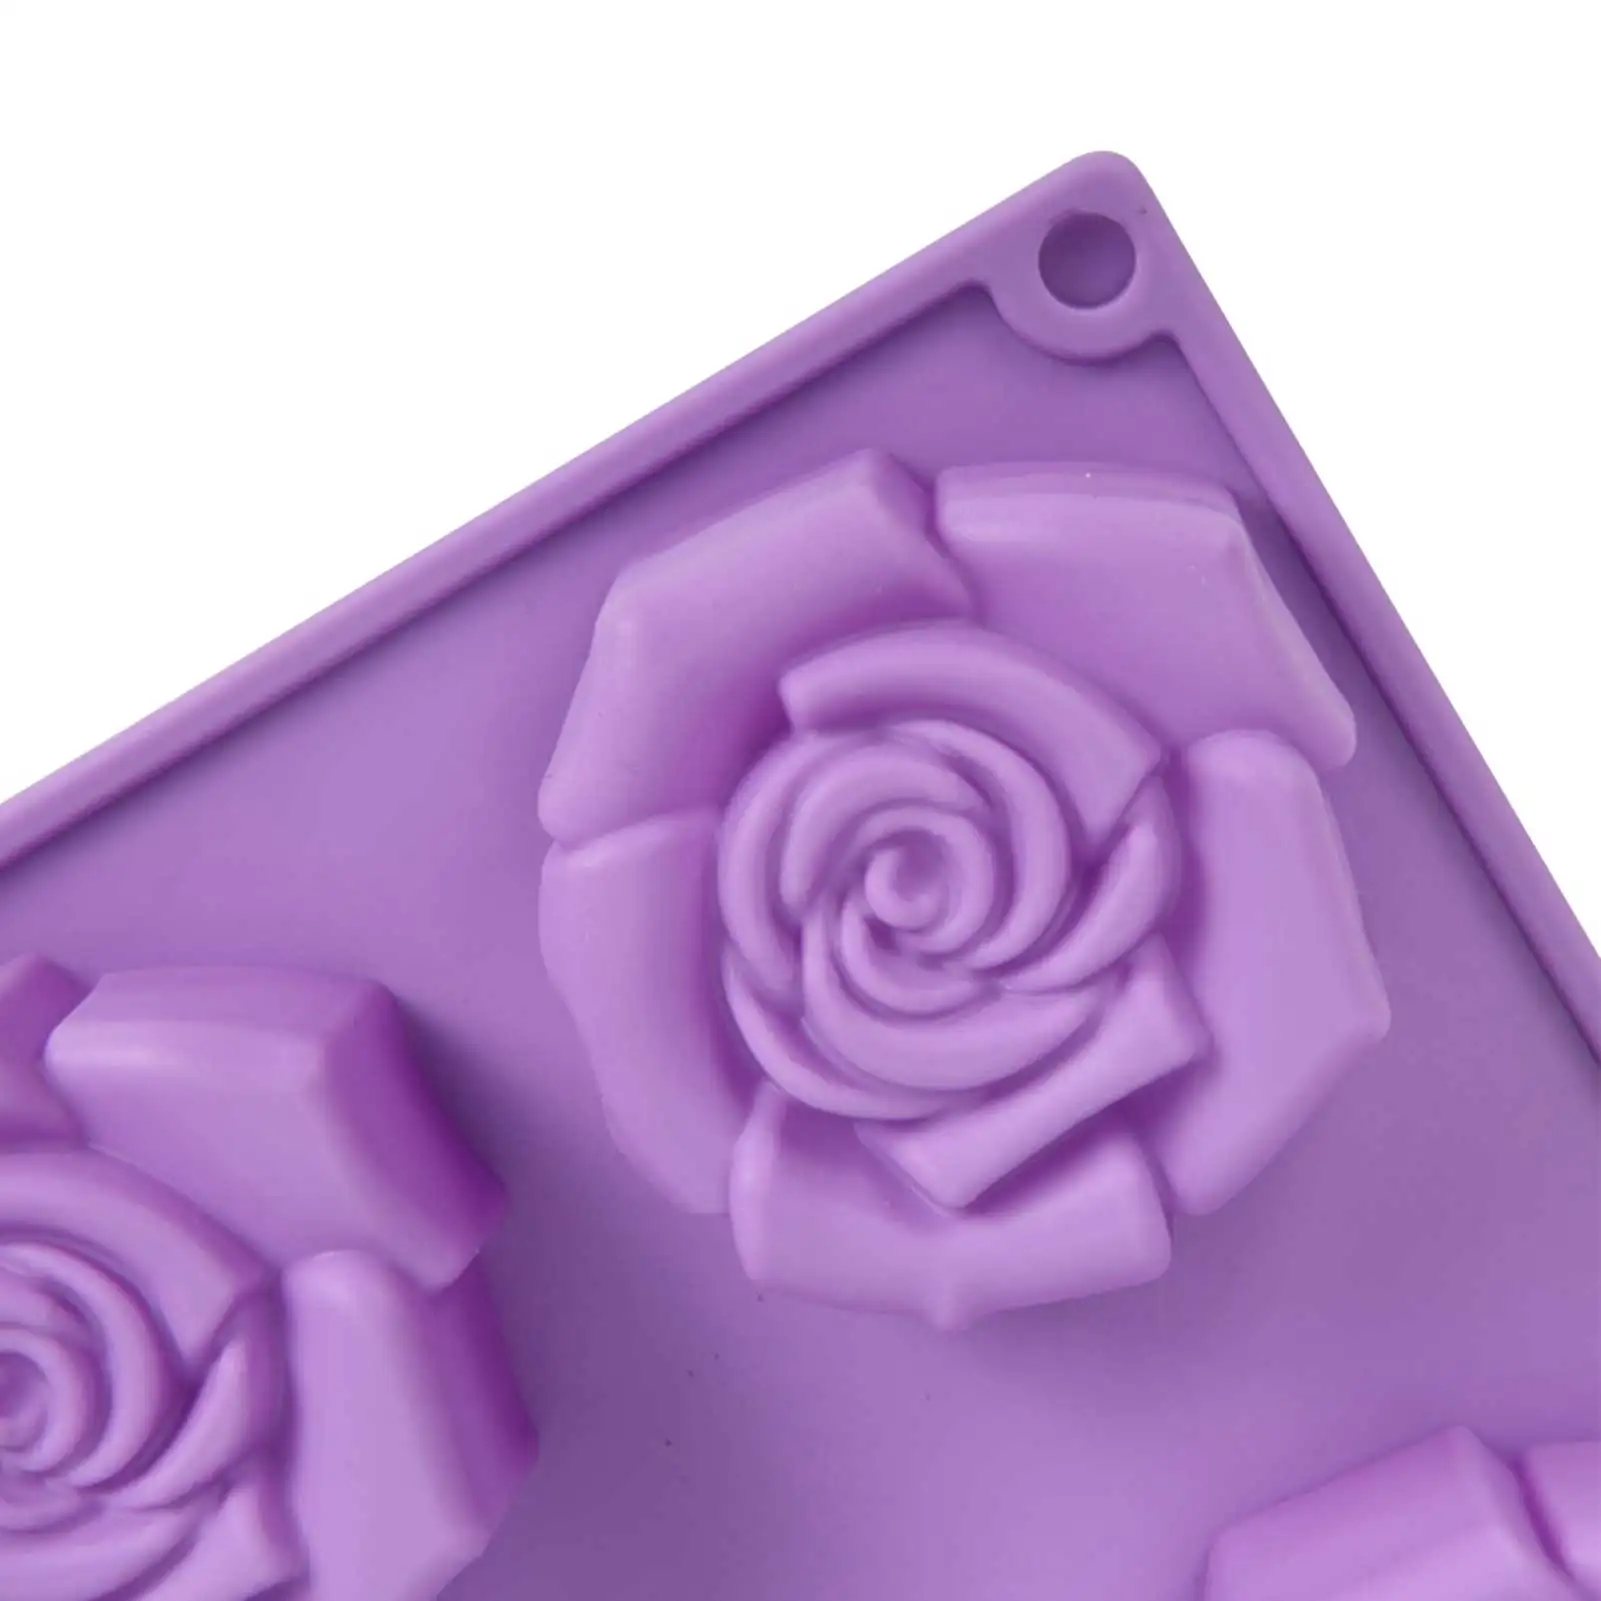 

Rose Cake Mold 6-Grid Handmade DIY Flower Baking Tool Chocolate Candy Mold Bakeware Kitchen Gadgets Baking Accessories